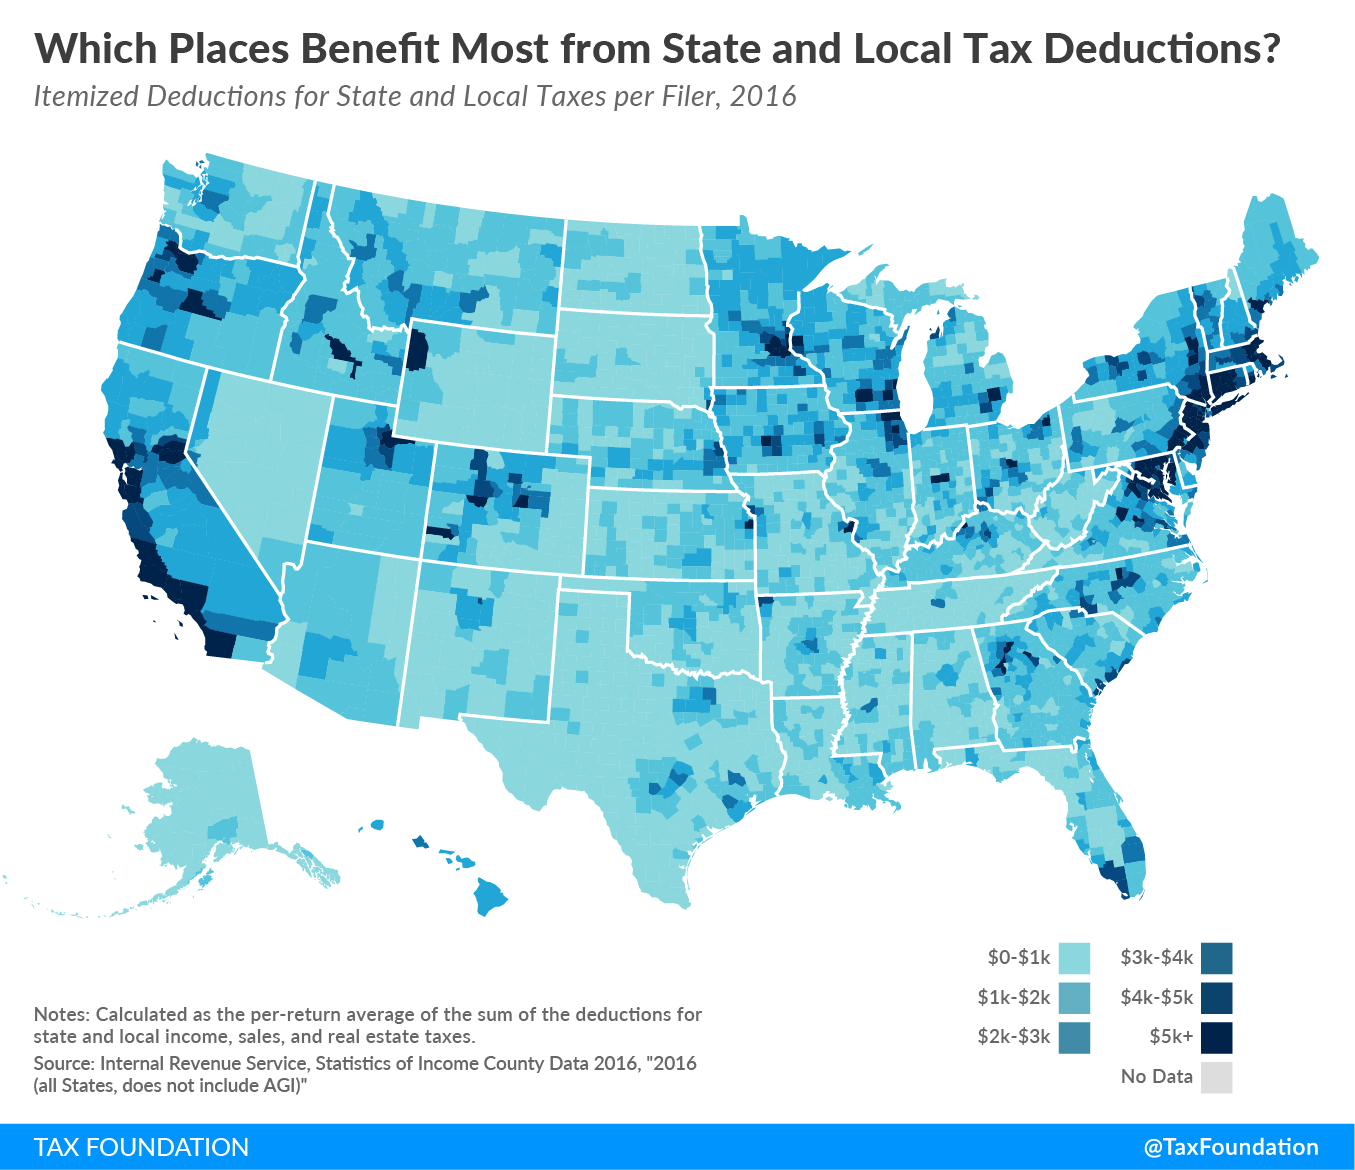 Who Benefits Most from the State and Local Tax Deduction, itemized deduction